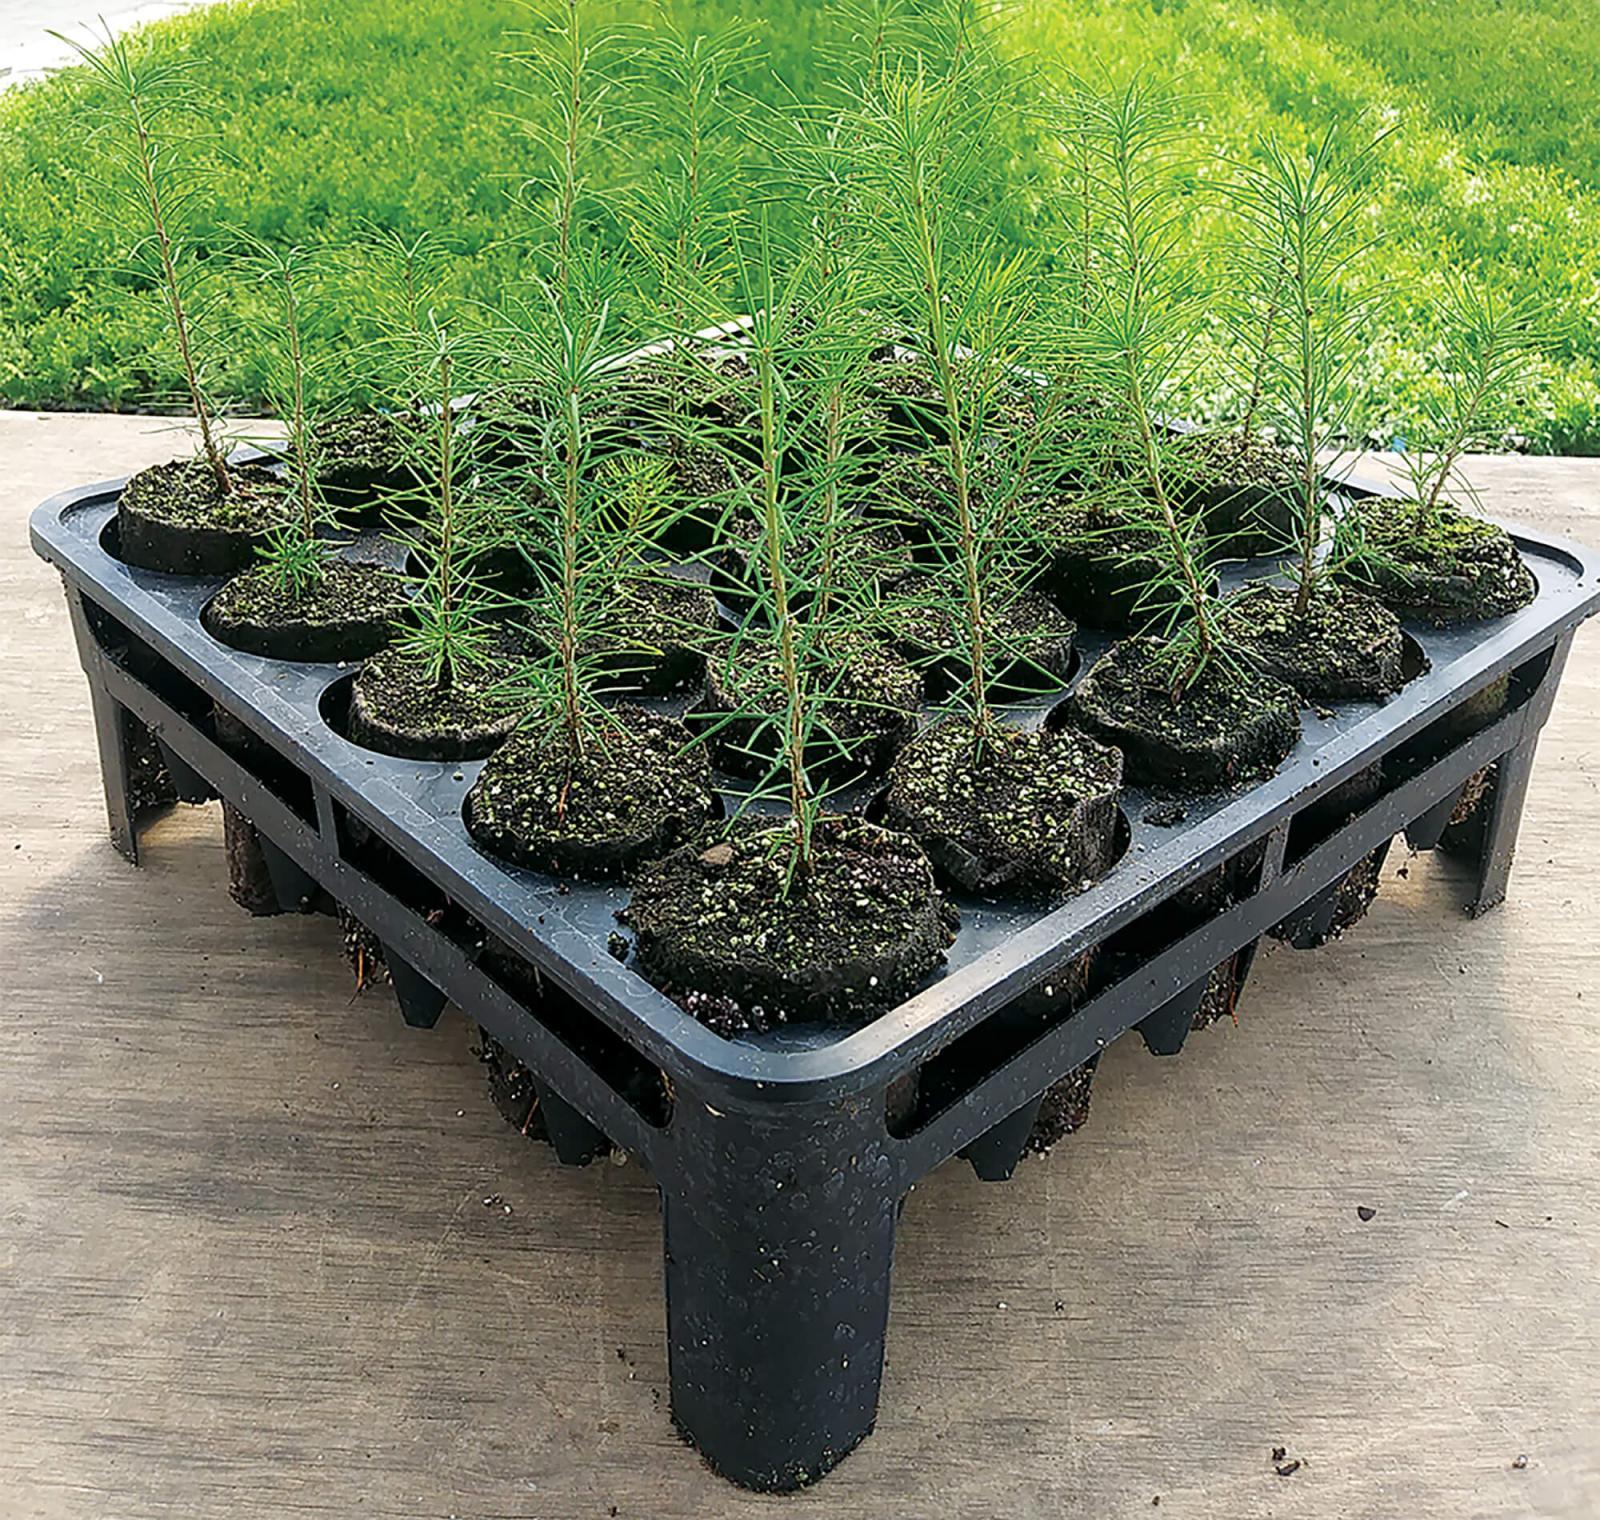 RootSmart is a wall-less, bottomless propagation system, which ideal root structure during the early stages of container plant production promotes.